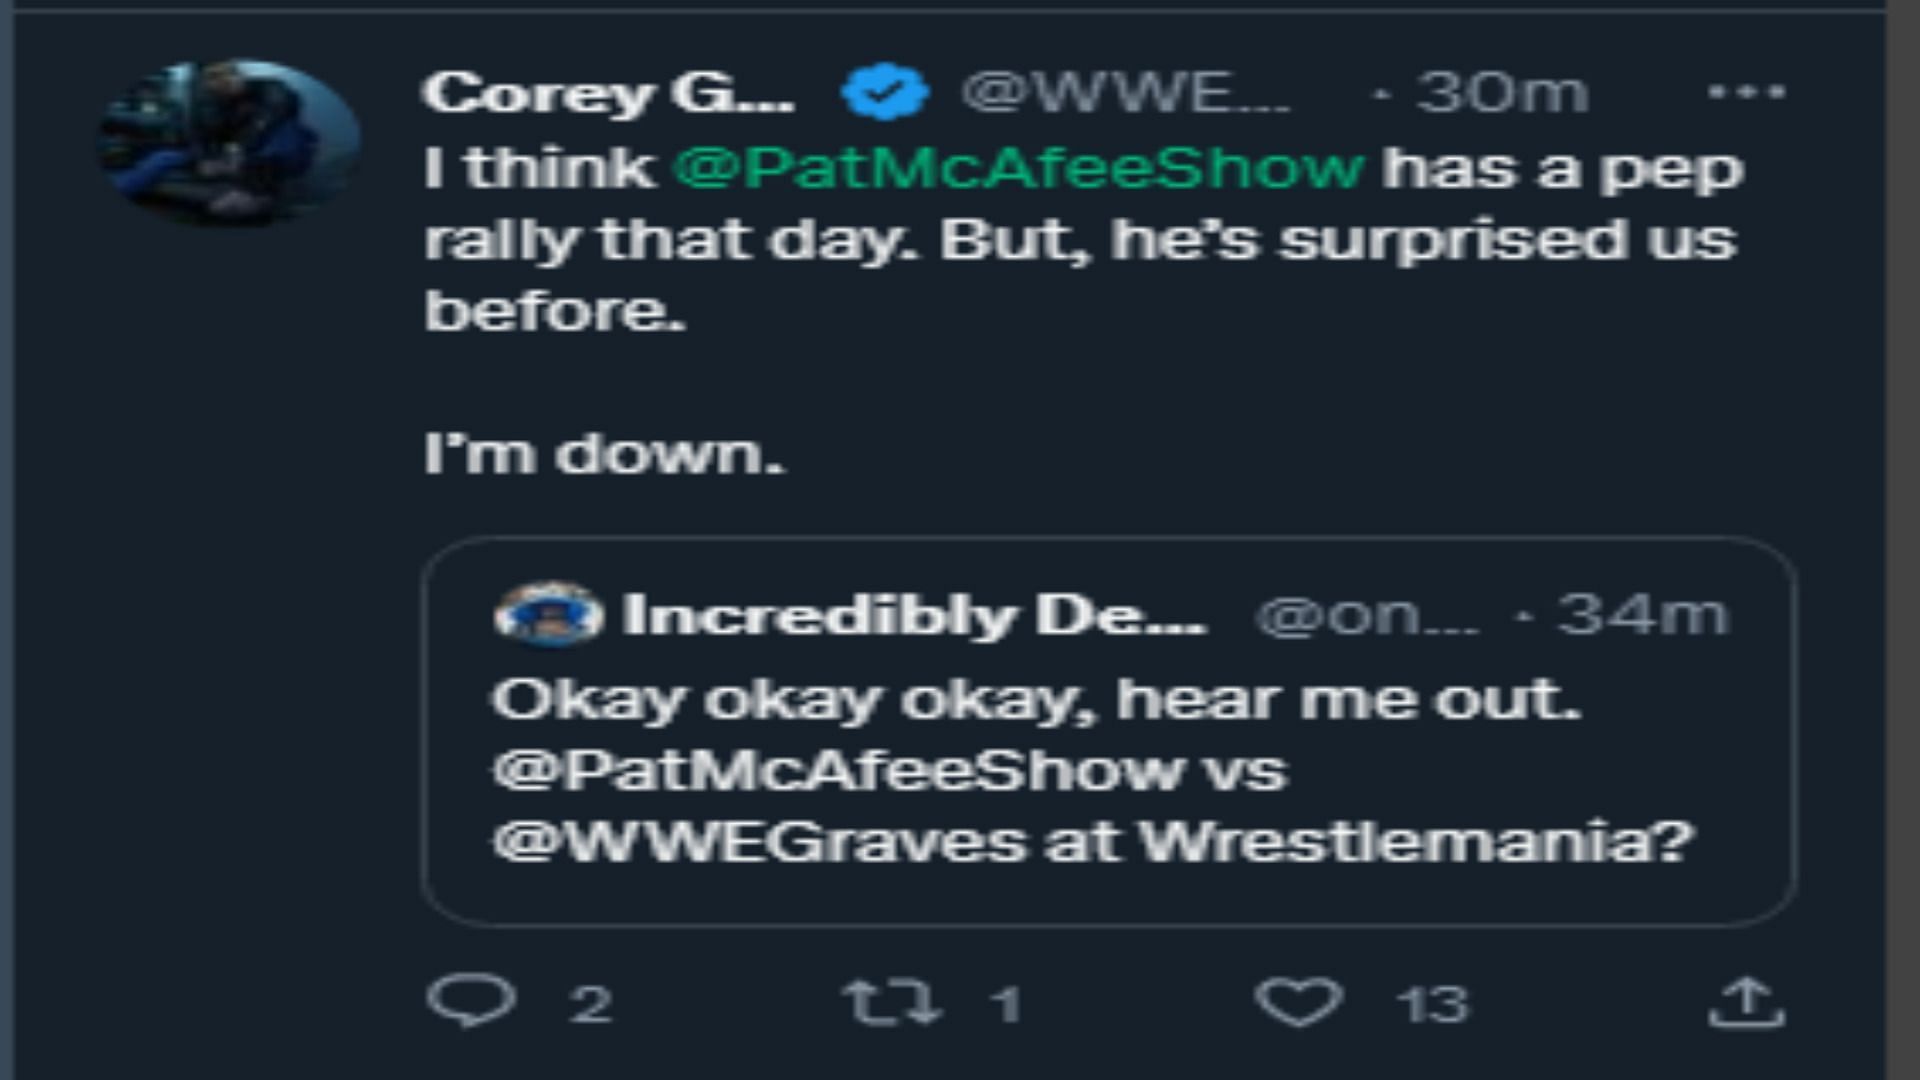 Corey Graves deleted this Tweet saying he is down to face Pat McAfee at WrestleMania 39